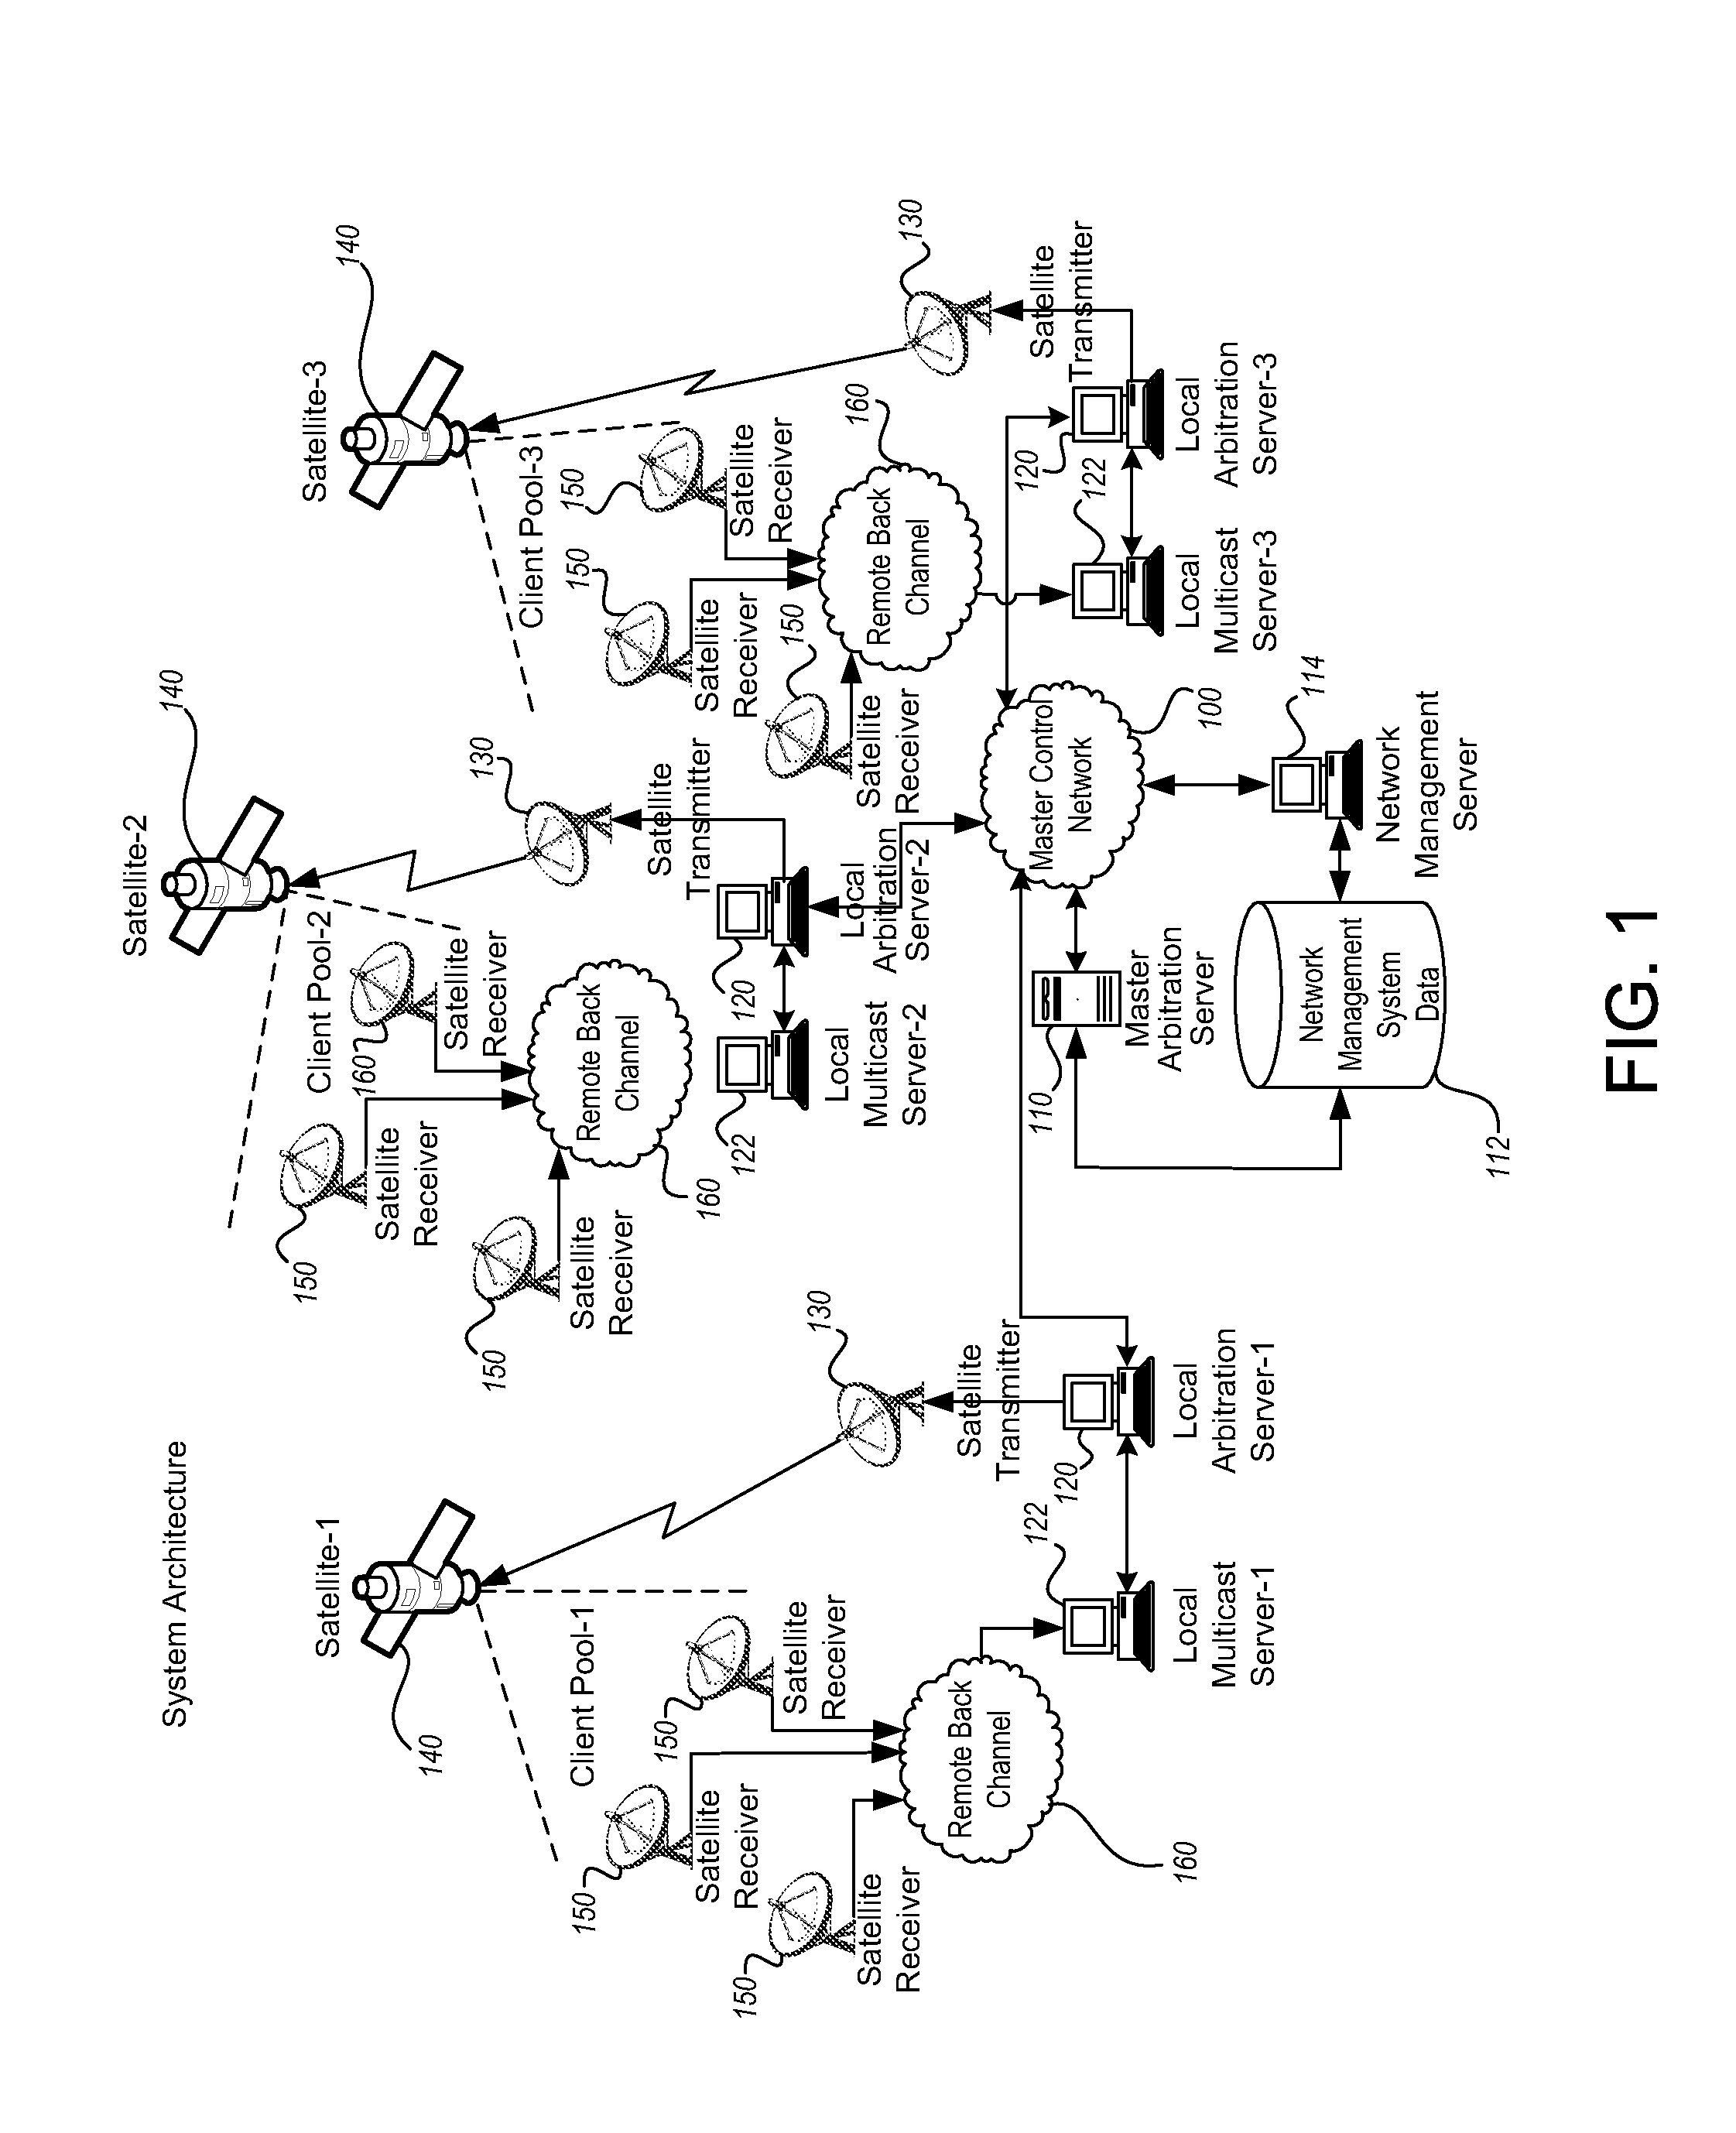 Multicast control systems and methods for dynamic, adaptive time, bandwidth,frequency, and satellite allocations